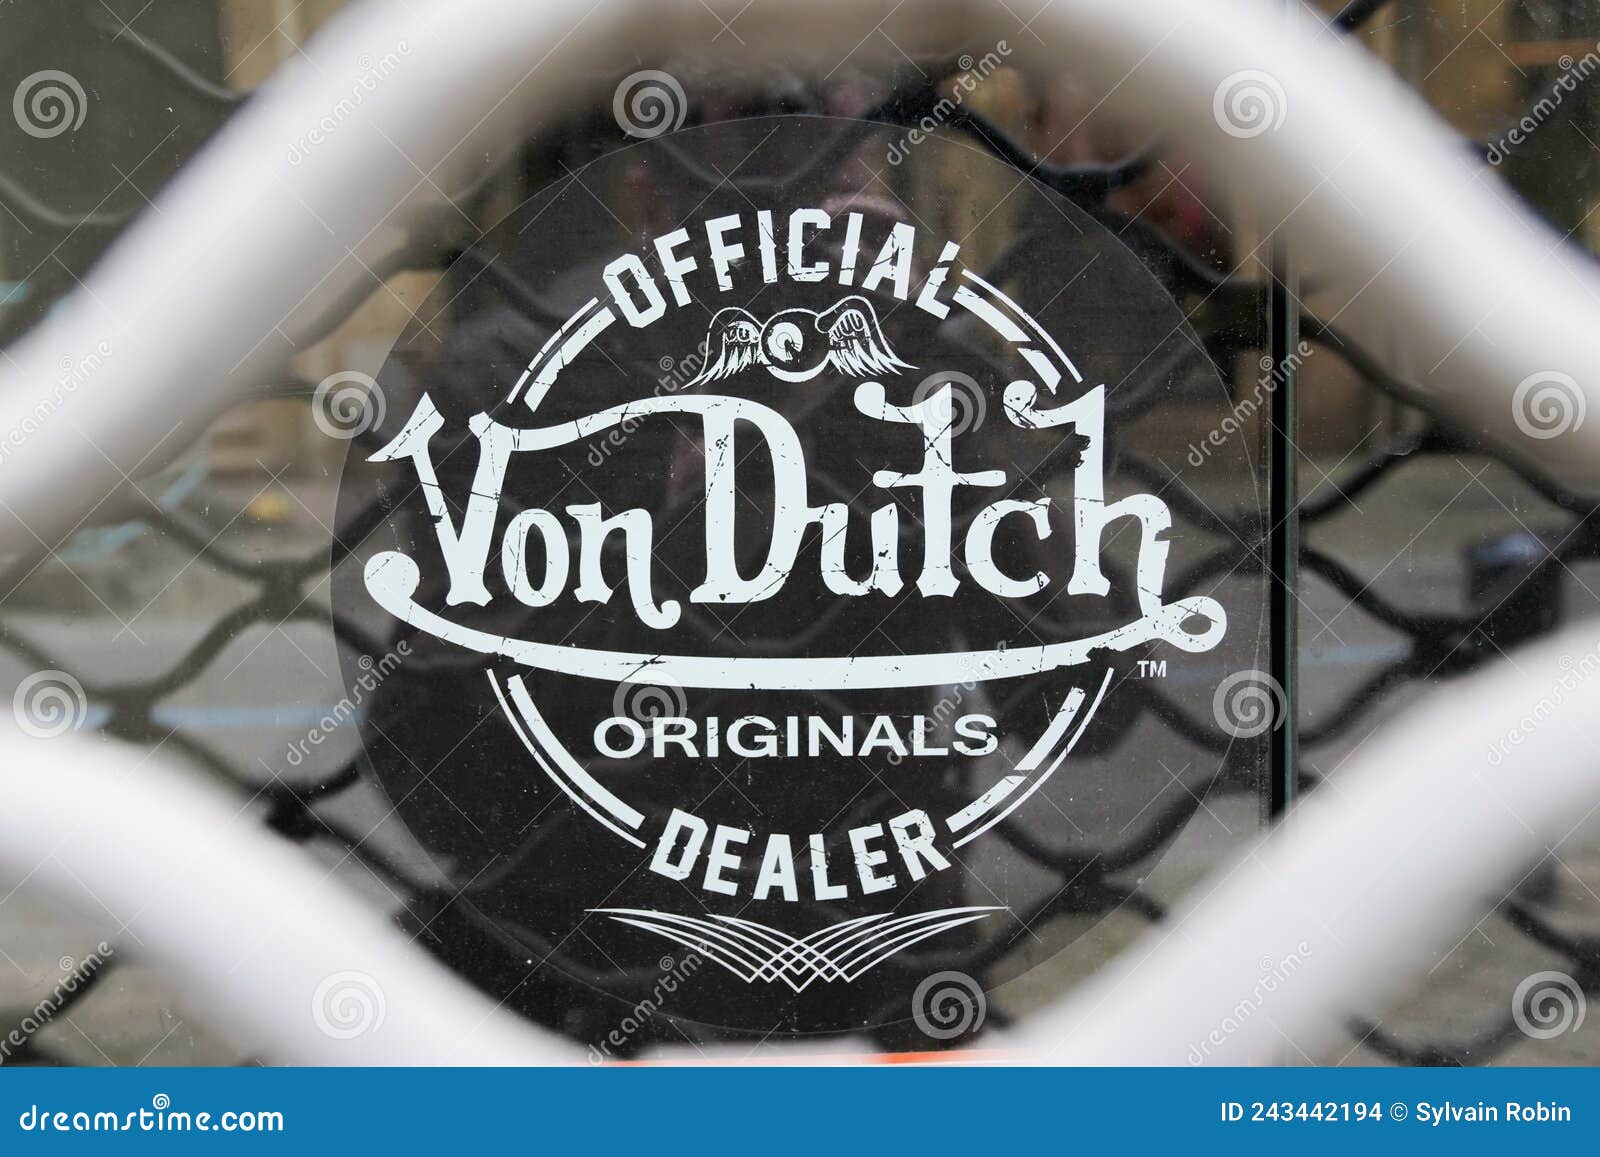 Von Dutch Official Dealer Logo Text and Brand Sign Facade American  Multinational Editorial Stock Image - Image of california, brand: 243442194